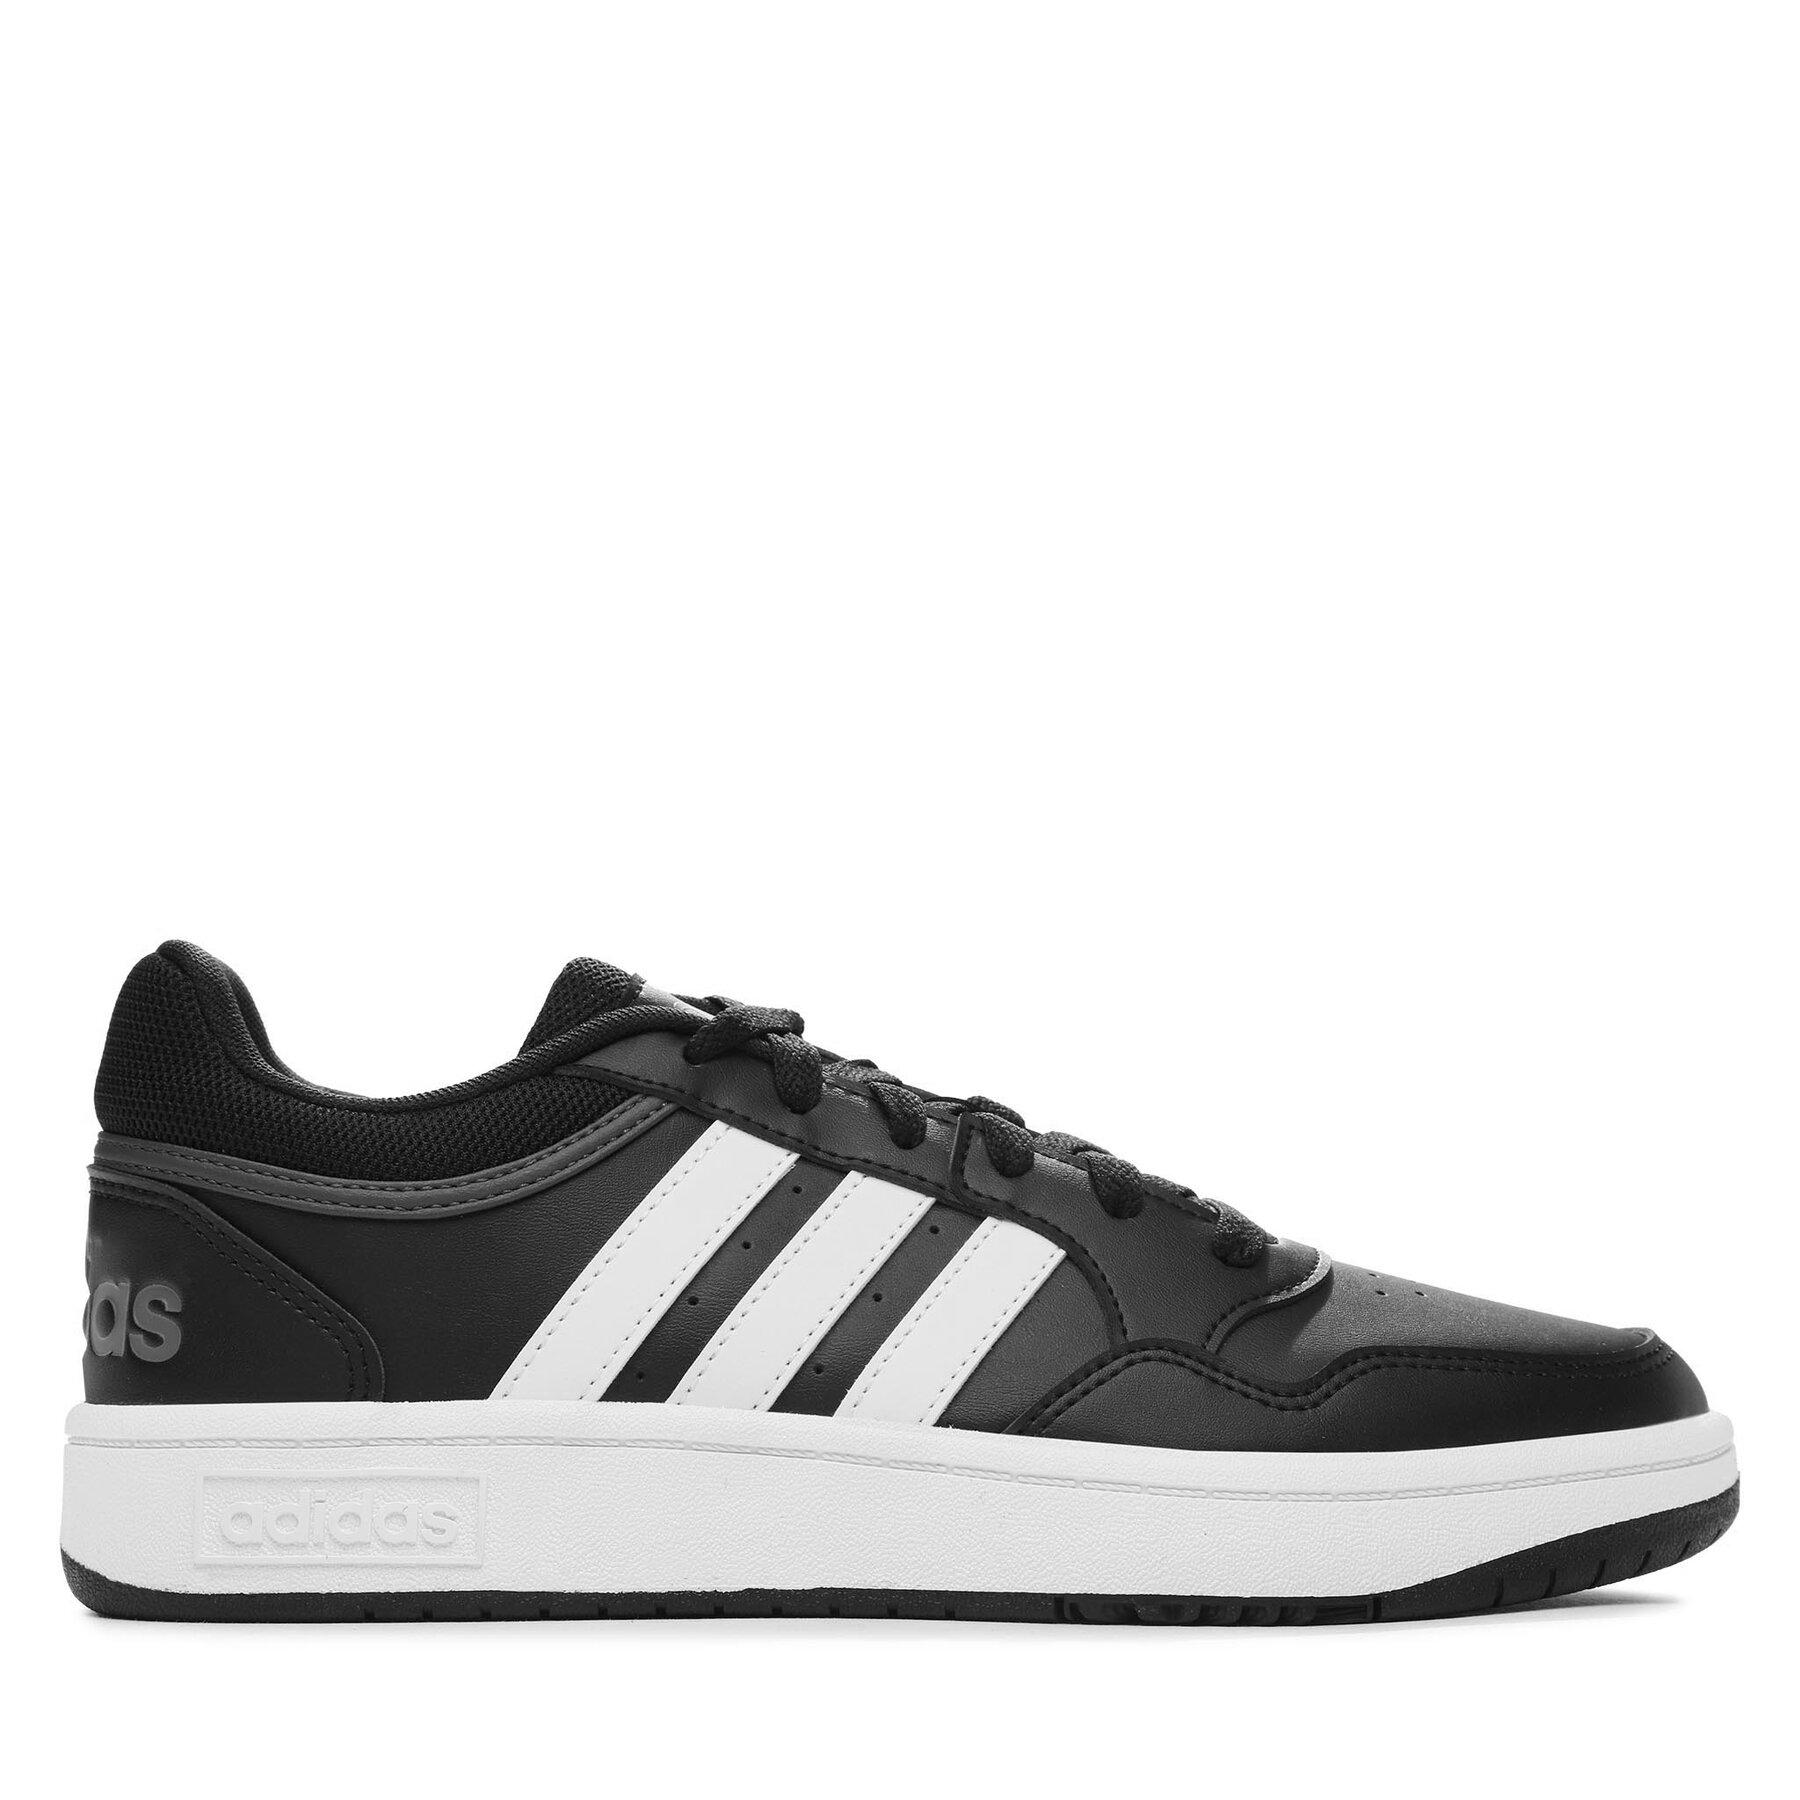 Adidas Hoops 3 0 Low Classic Vintage Noir Black White Chaussures Homme